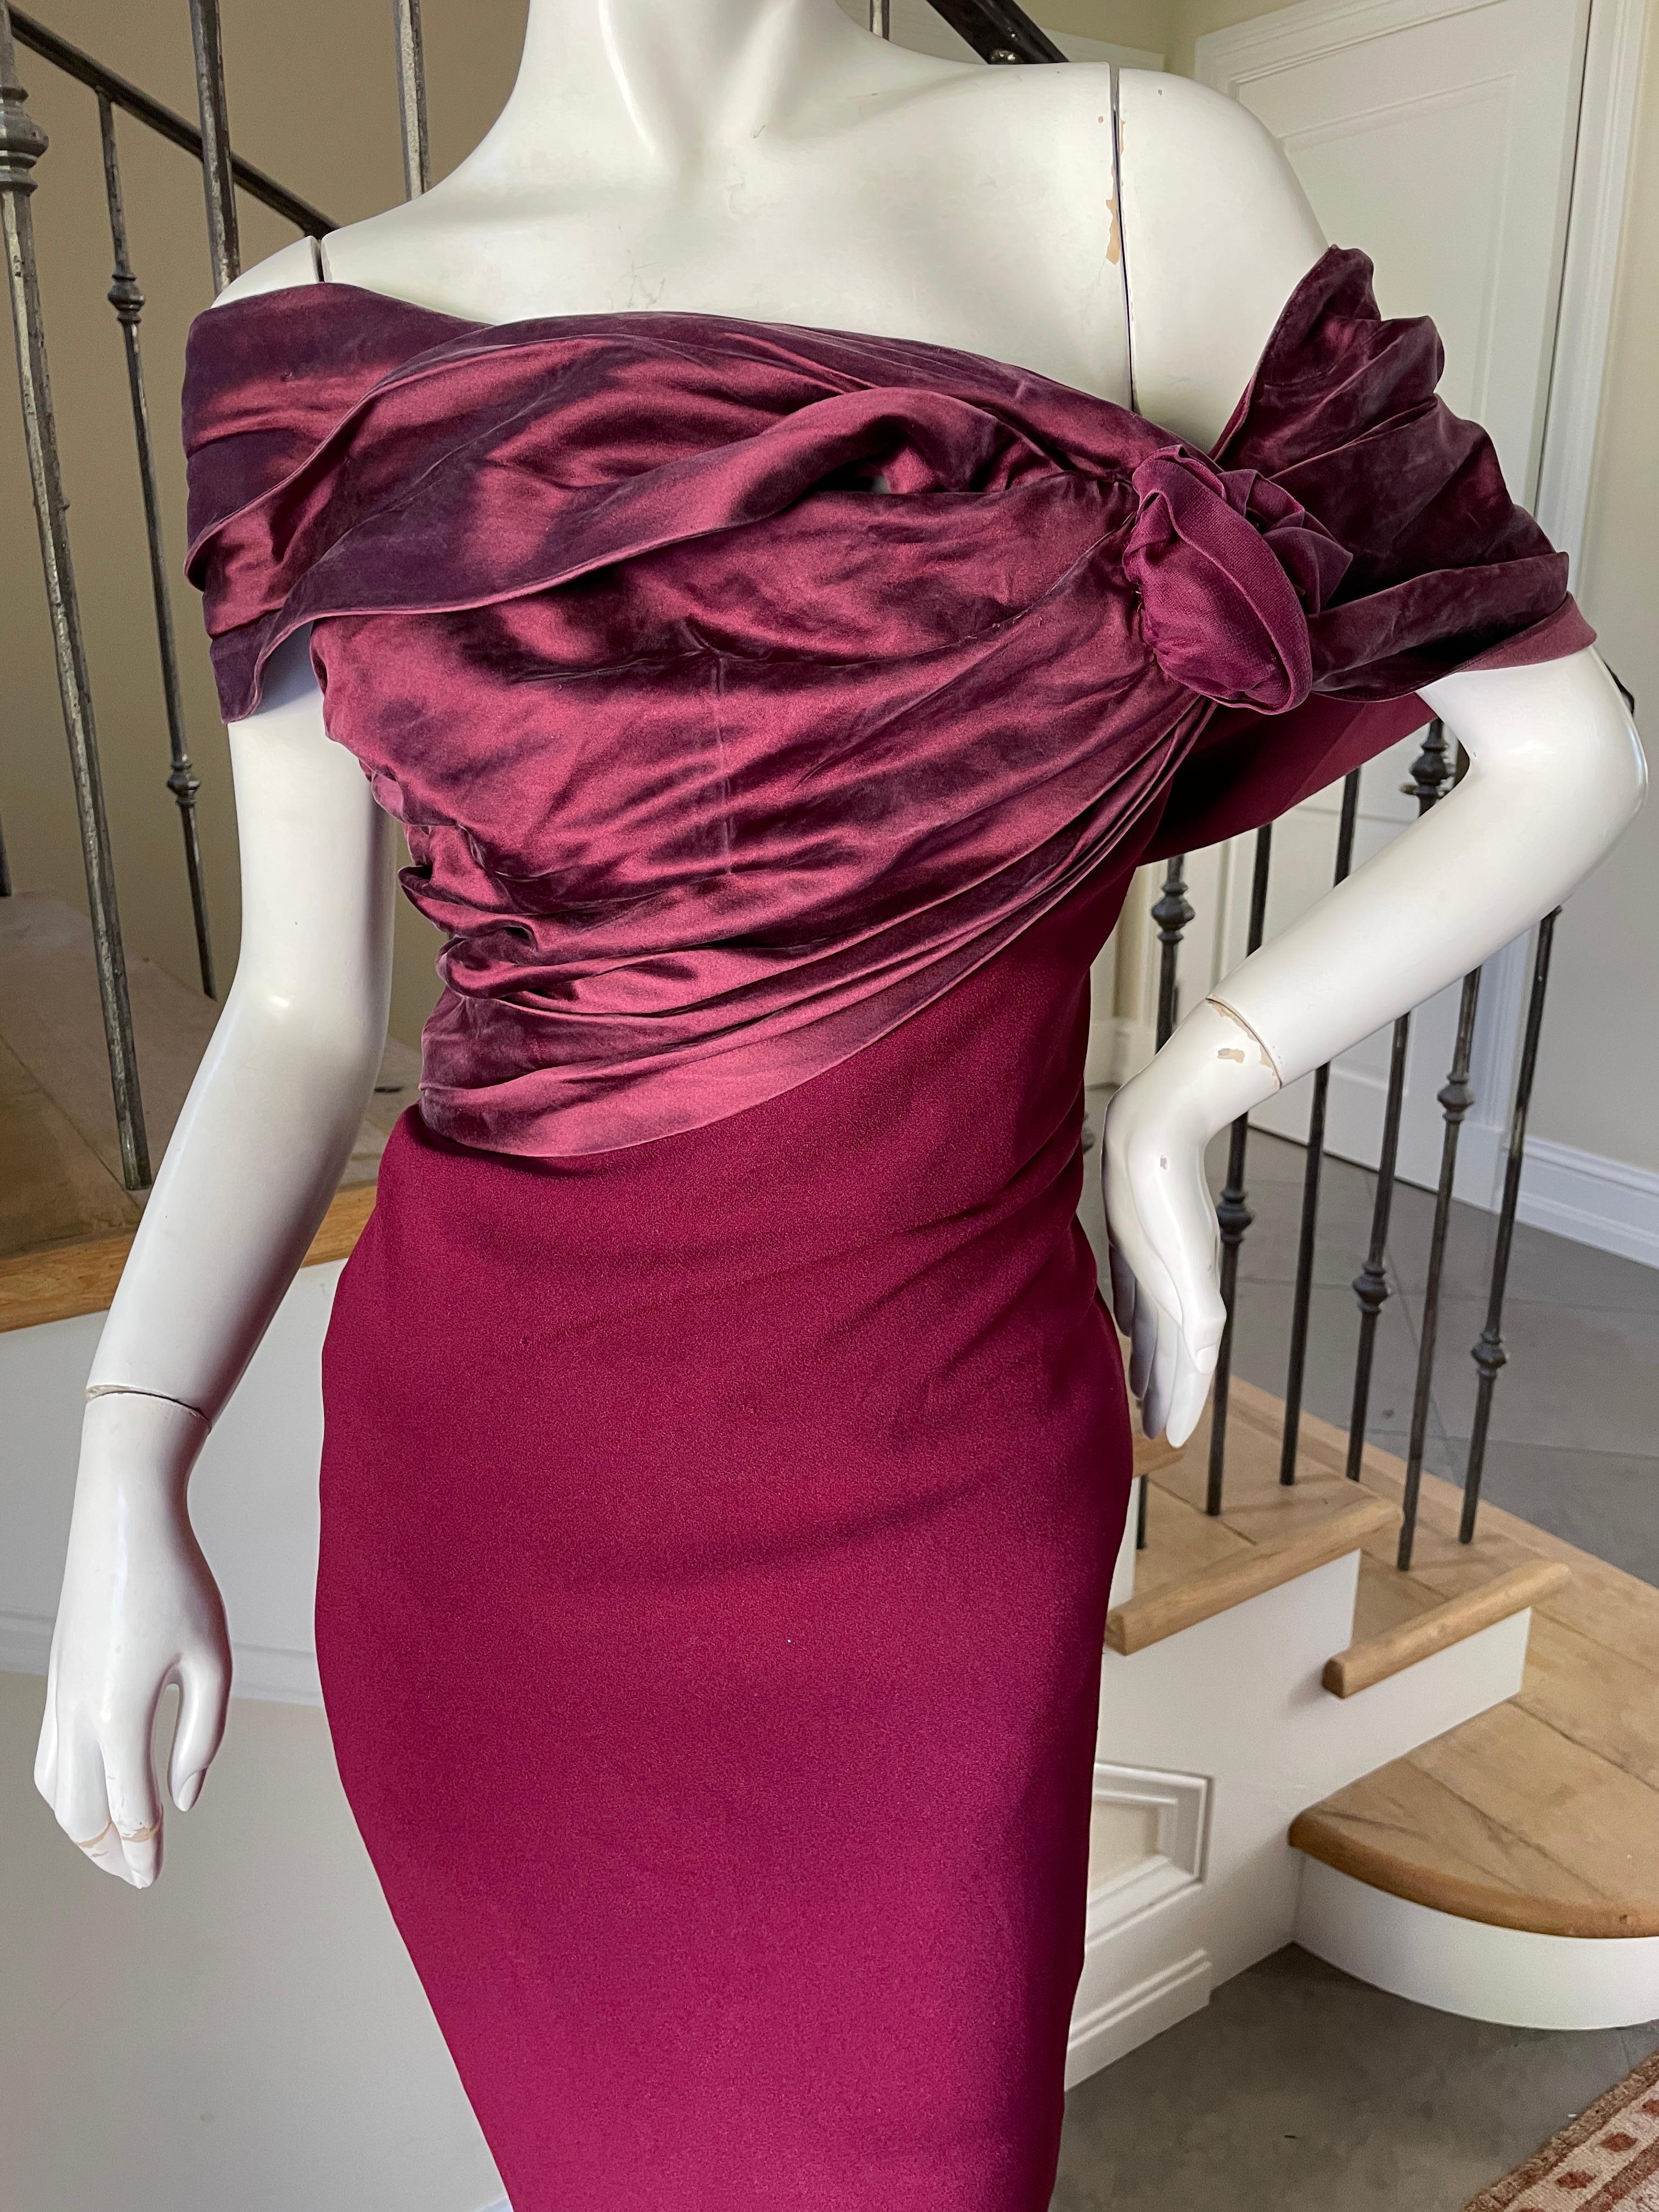 Christian Dior by John Galliano Burgundy Red Draped Evening Dress For Sale 1